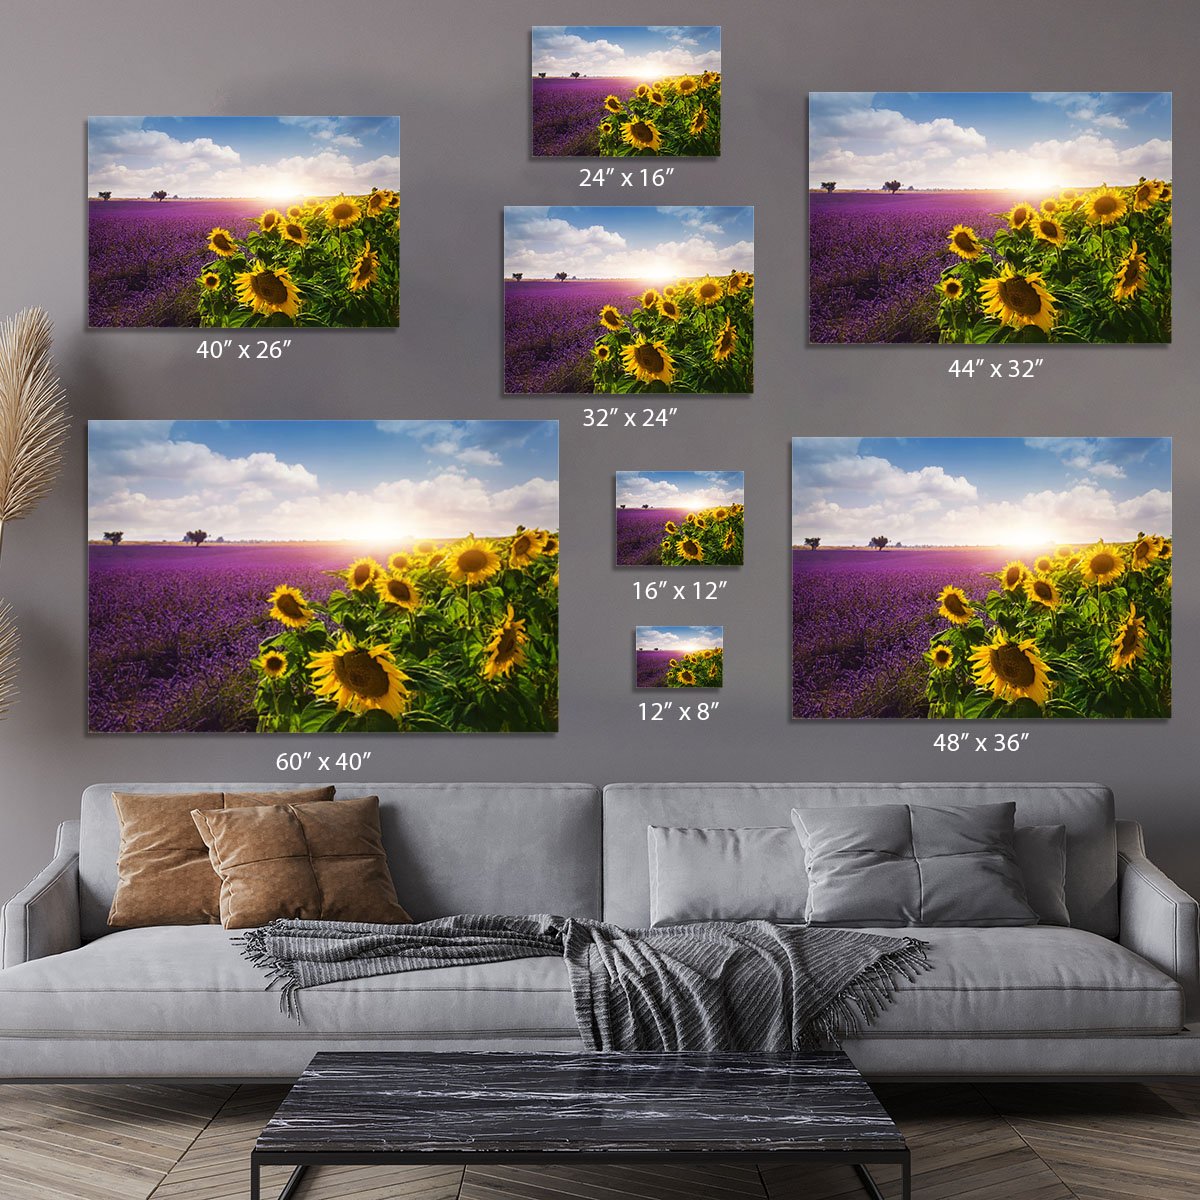 Lavender and sunflowers fields Canvas Print or Poster